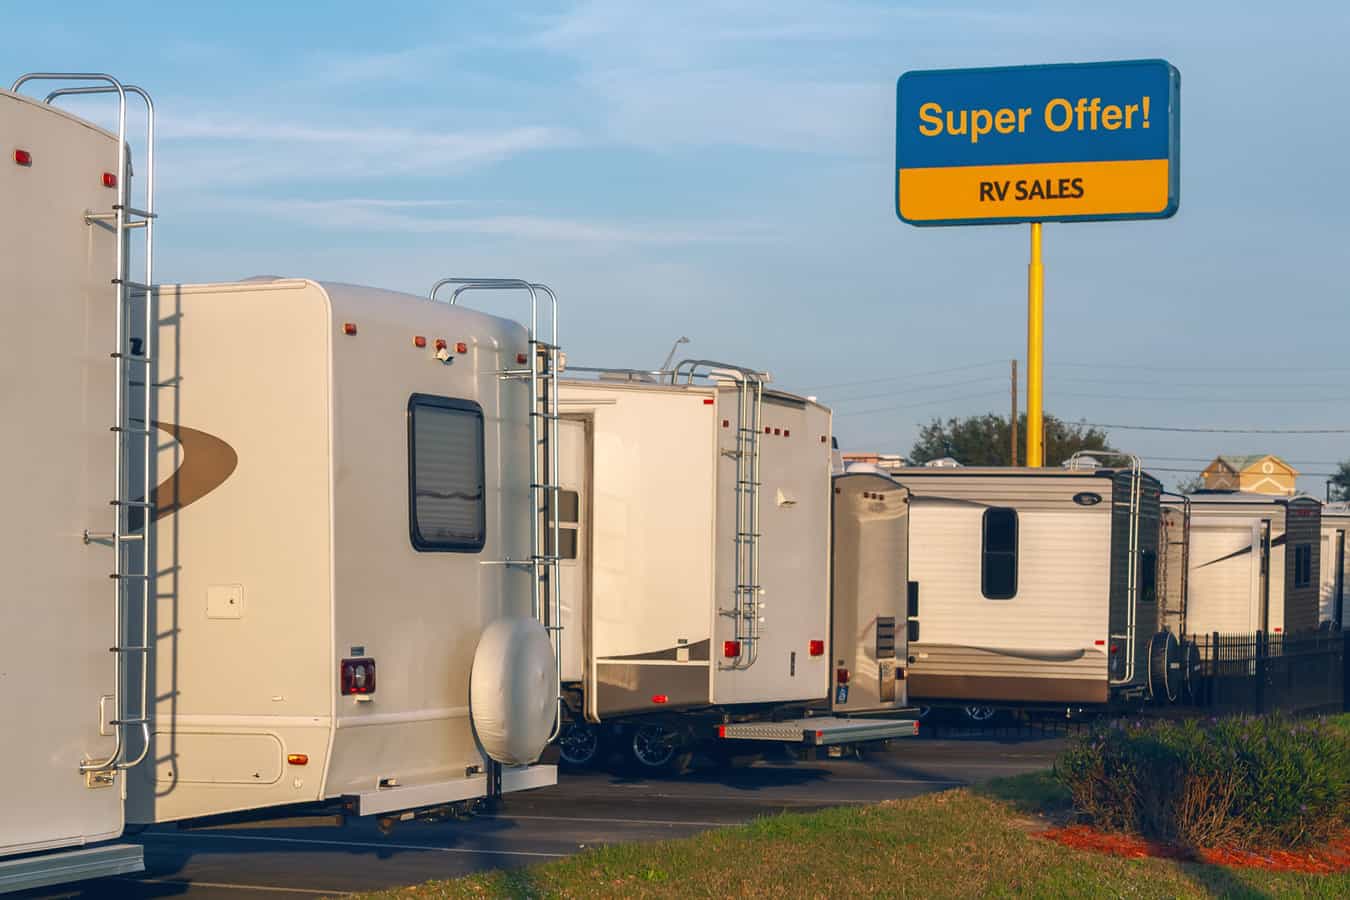 RVs at dealer, buying an RV